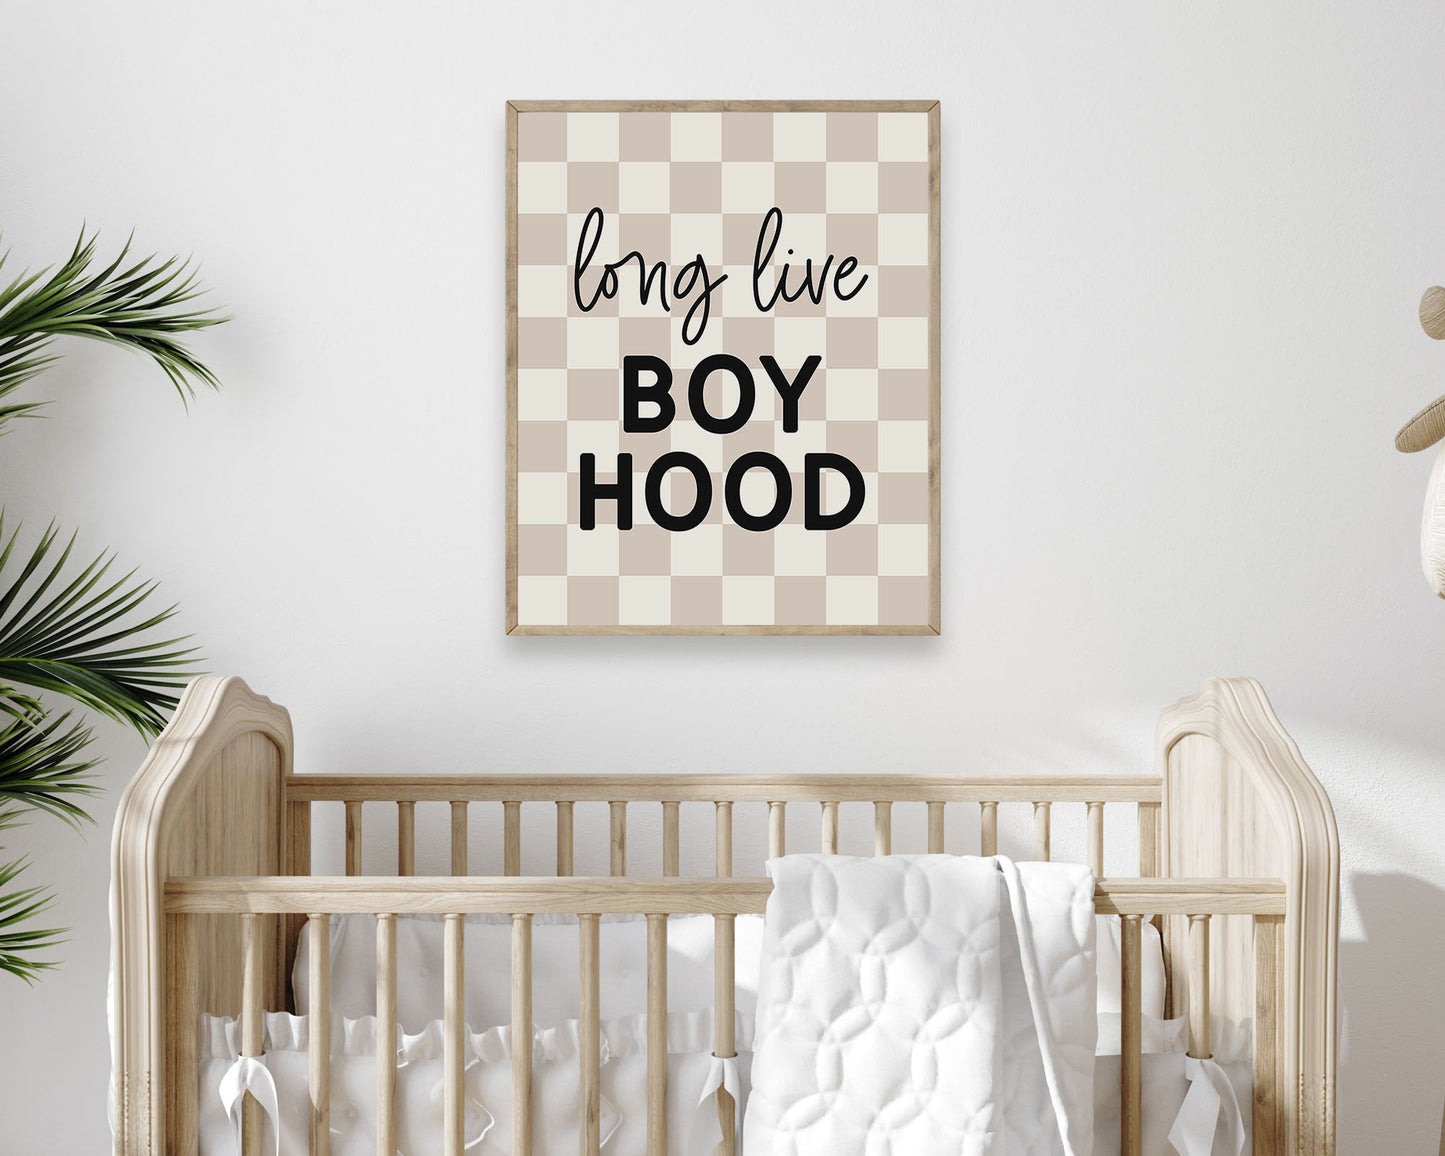 Long Live Boy Hood Printable Wall Art featuring cursive script and block lettering in black on a neutral tan and off white checkered background. Perfect for Baby Boy Nursery Decor, Toddler Boys Bedroom Decor or Children's Play Room Wall Art.